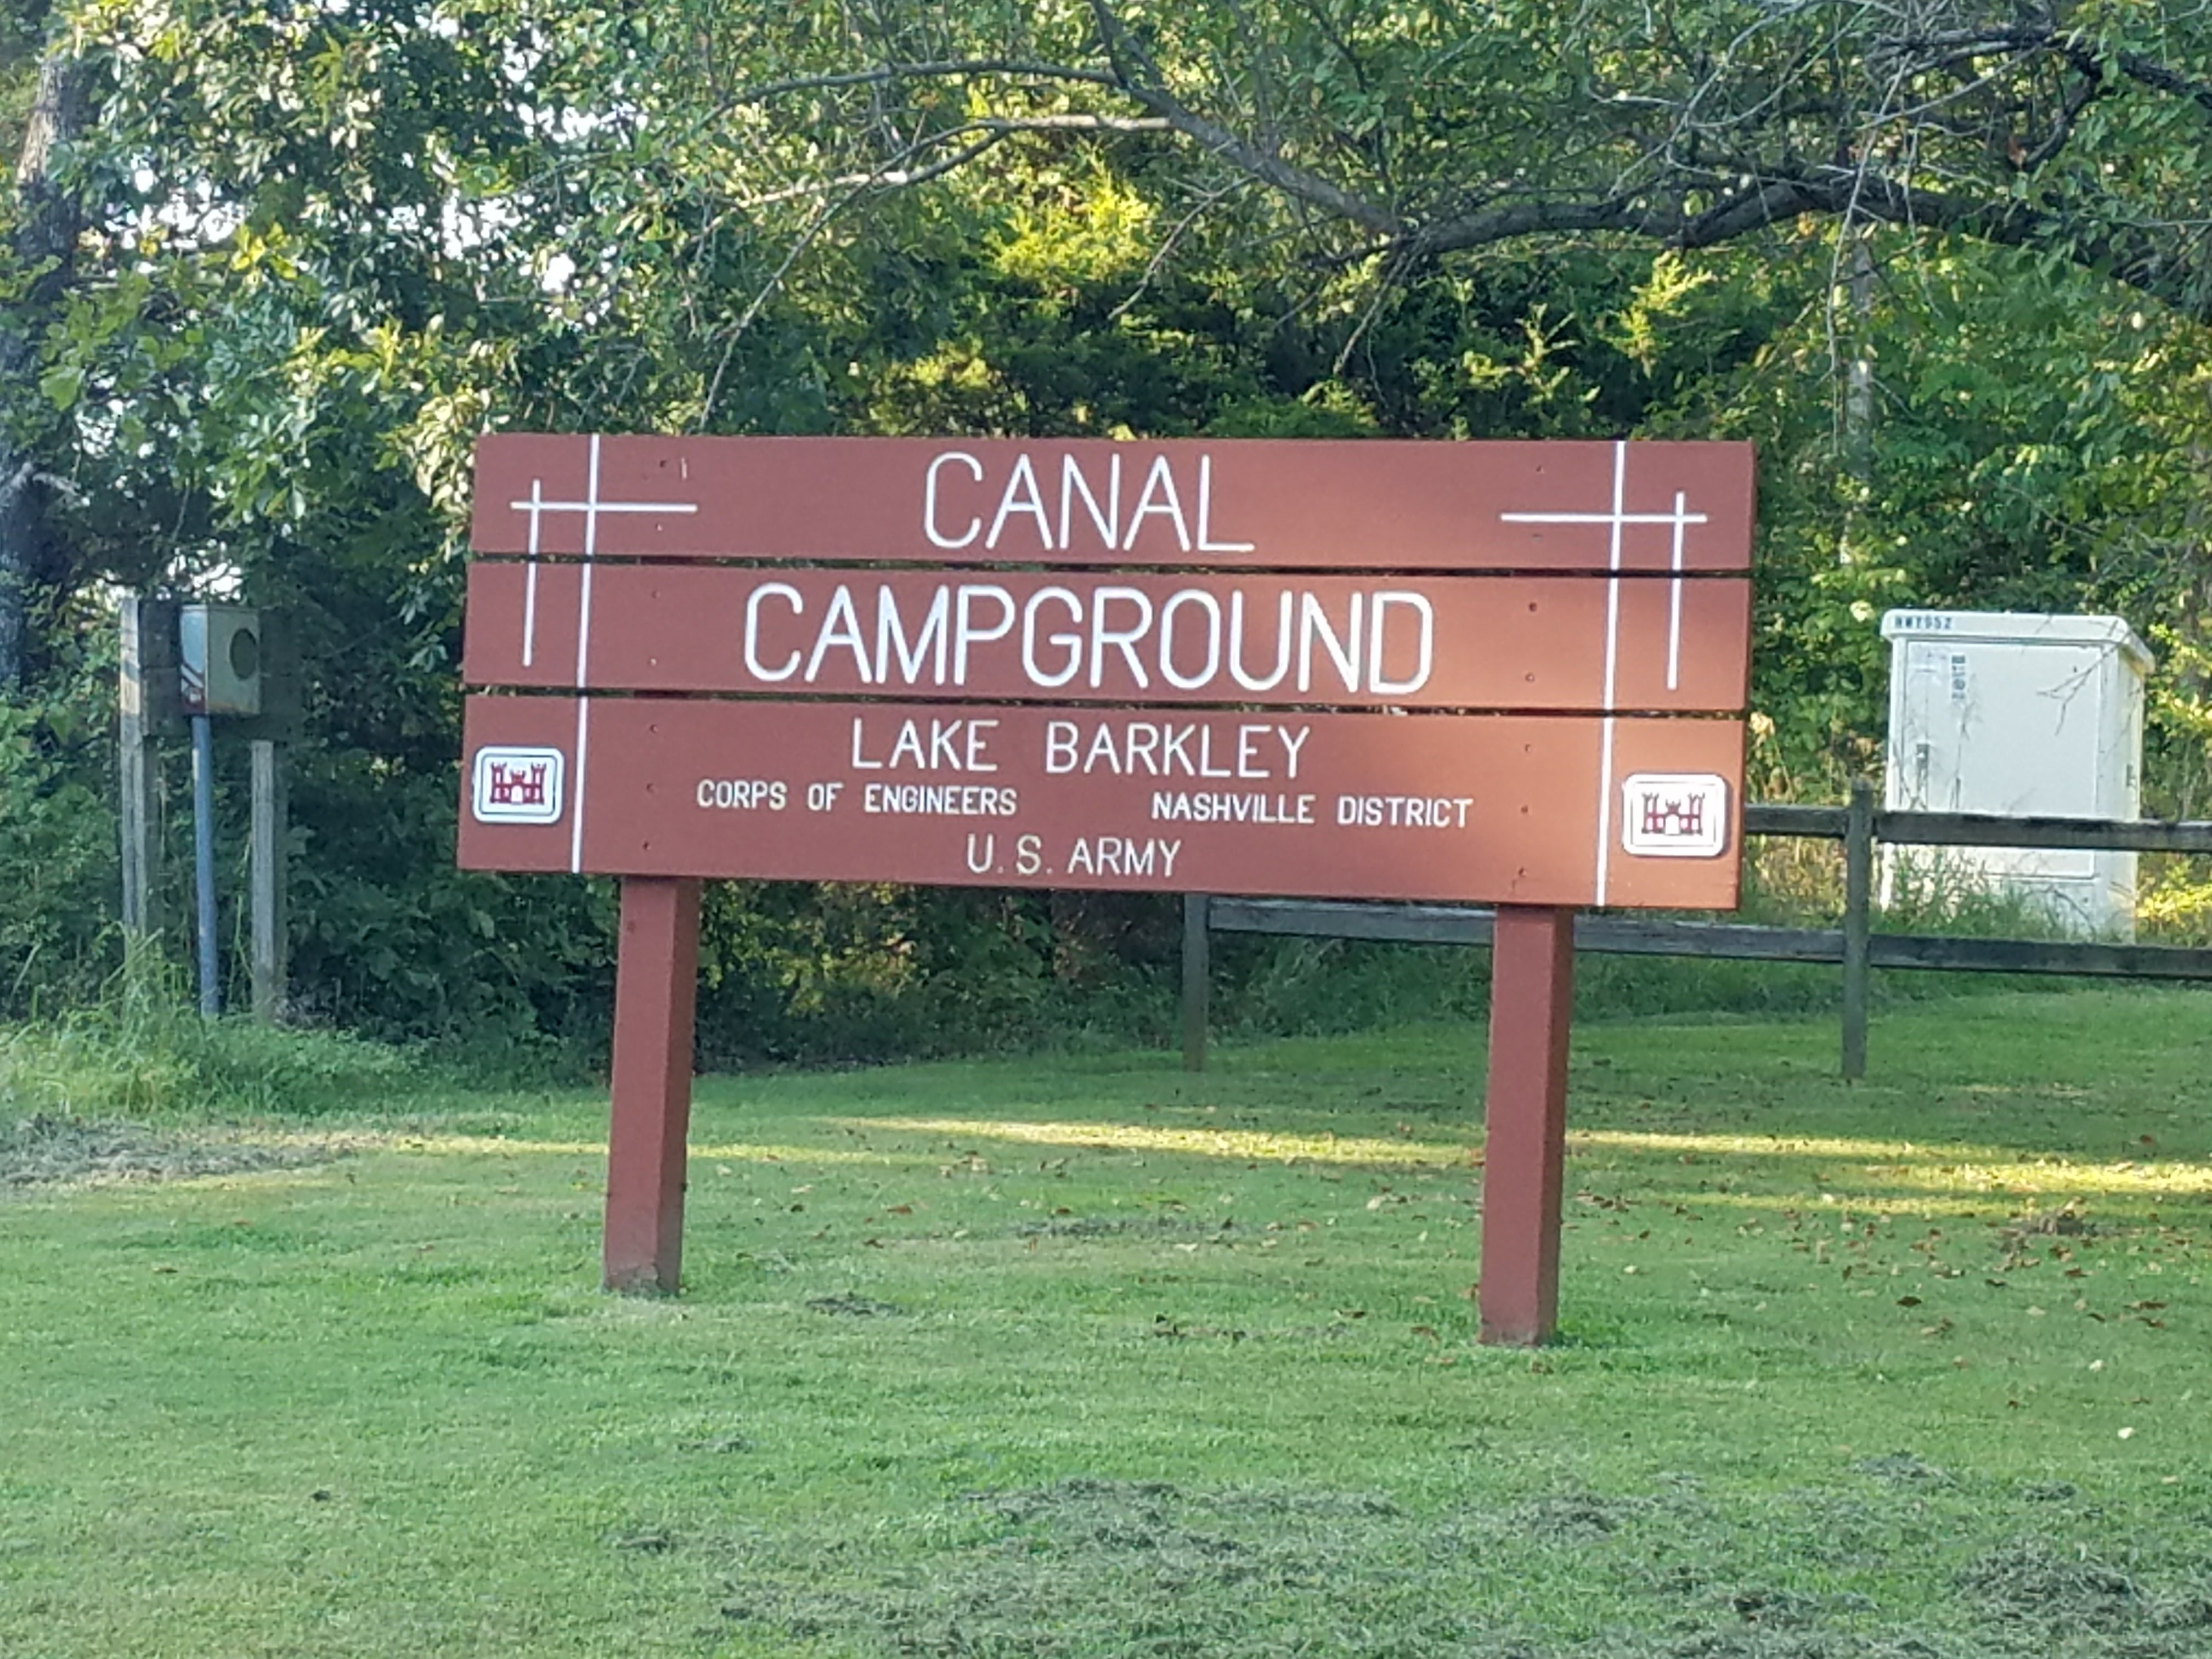 Both the canal campground at Lake Barkley, and the canal Campground on the canal use the same entryway